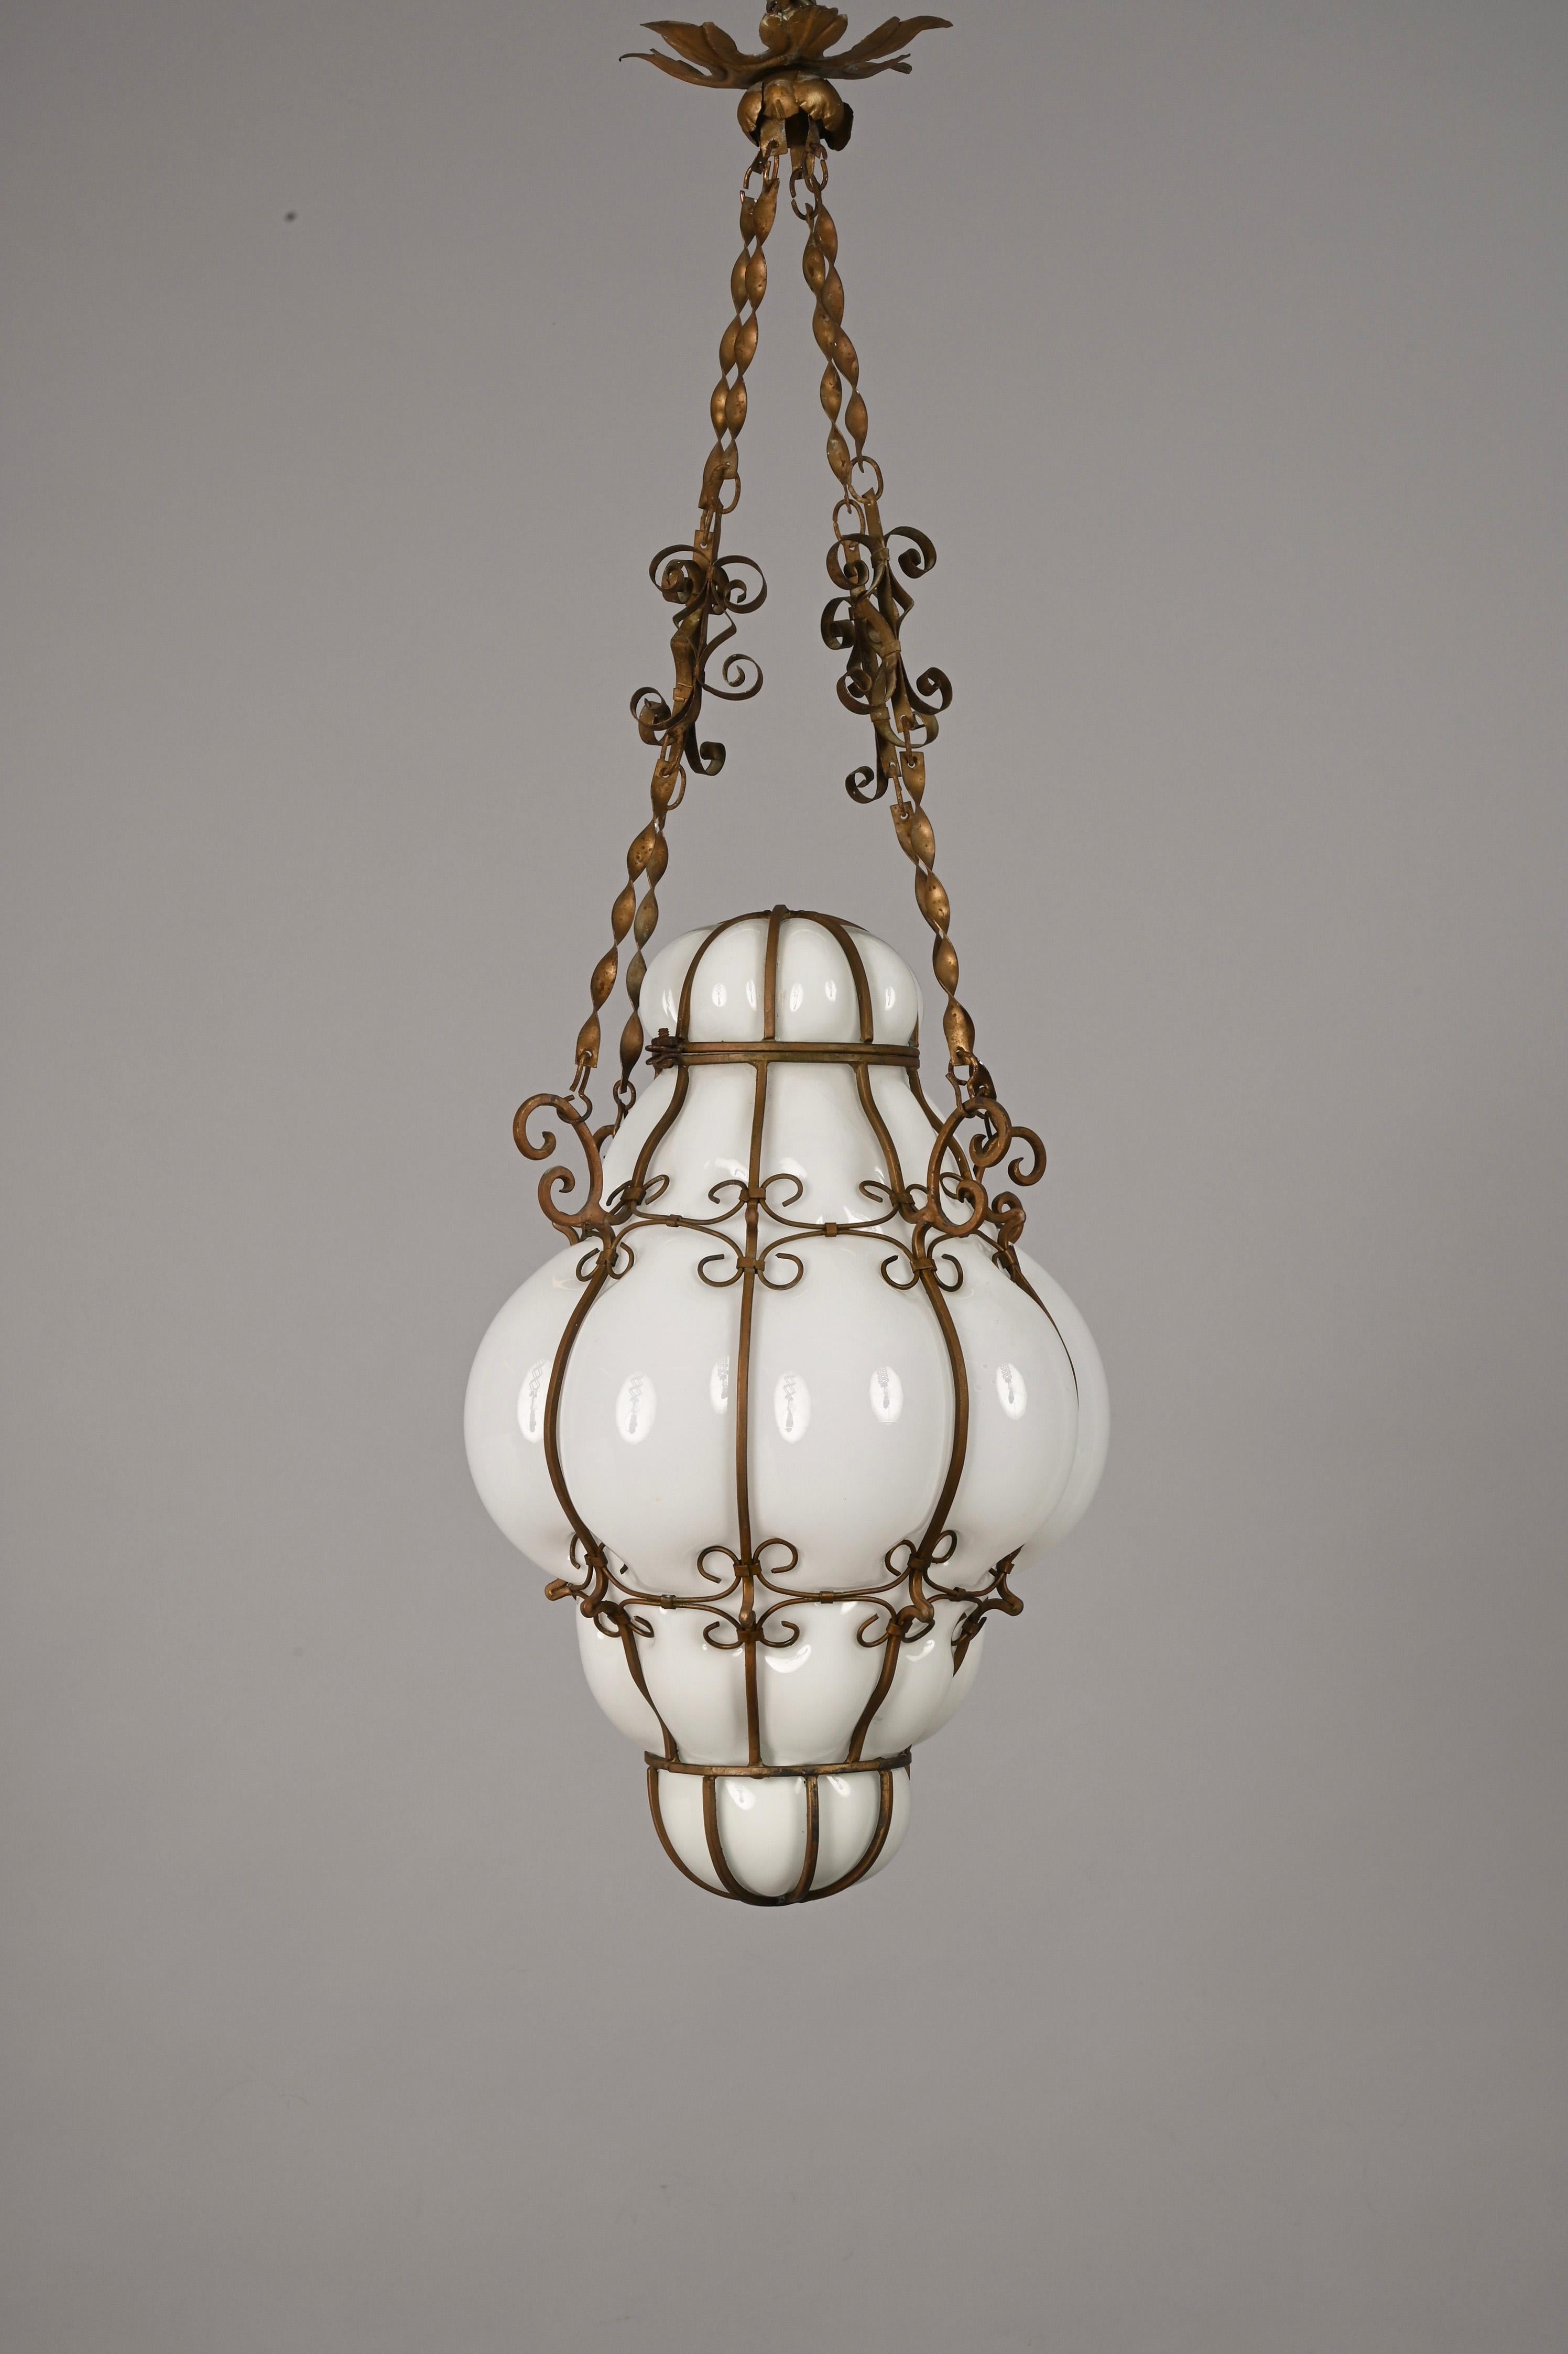 Midcentury Venetian Brass and Mouth Blown Murano White Glass Chandelier, 1940s For Sale 5